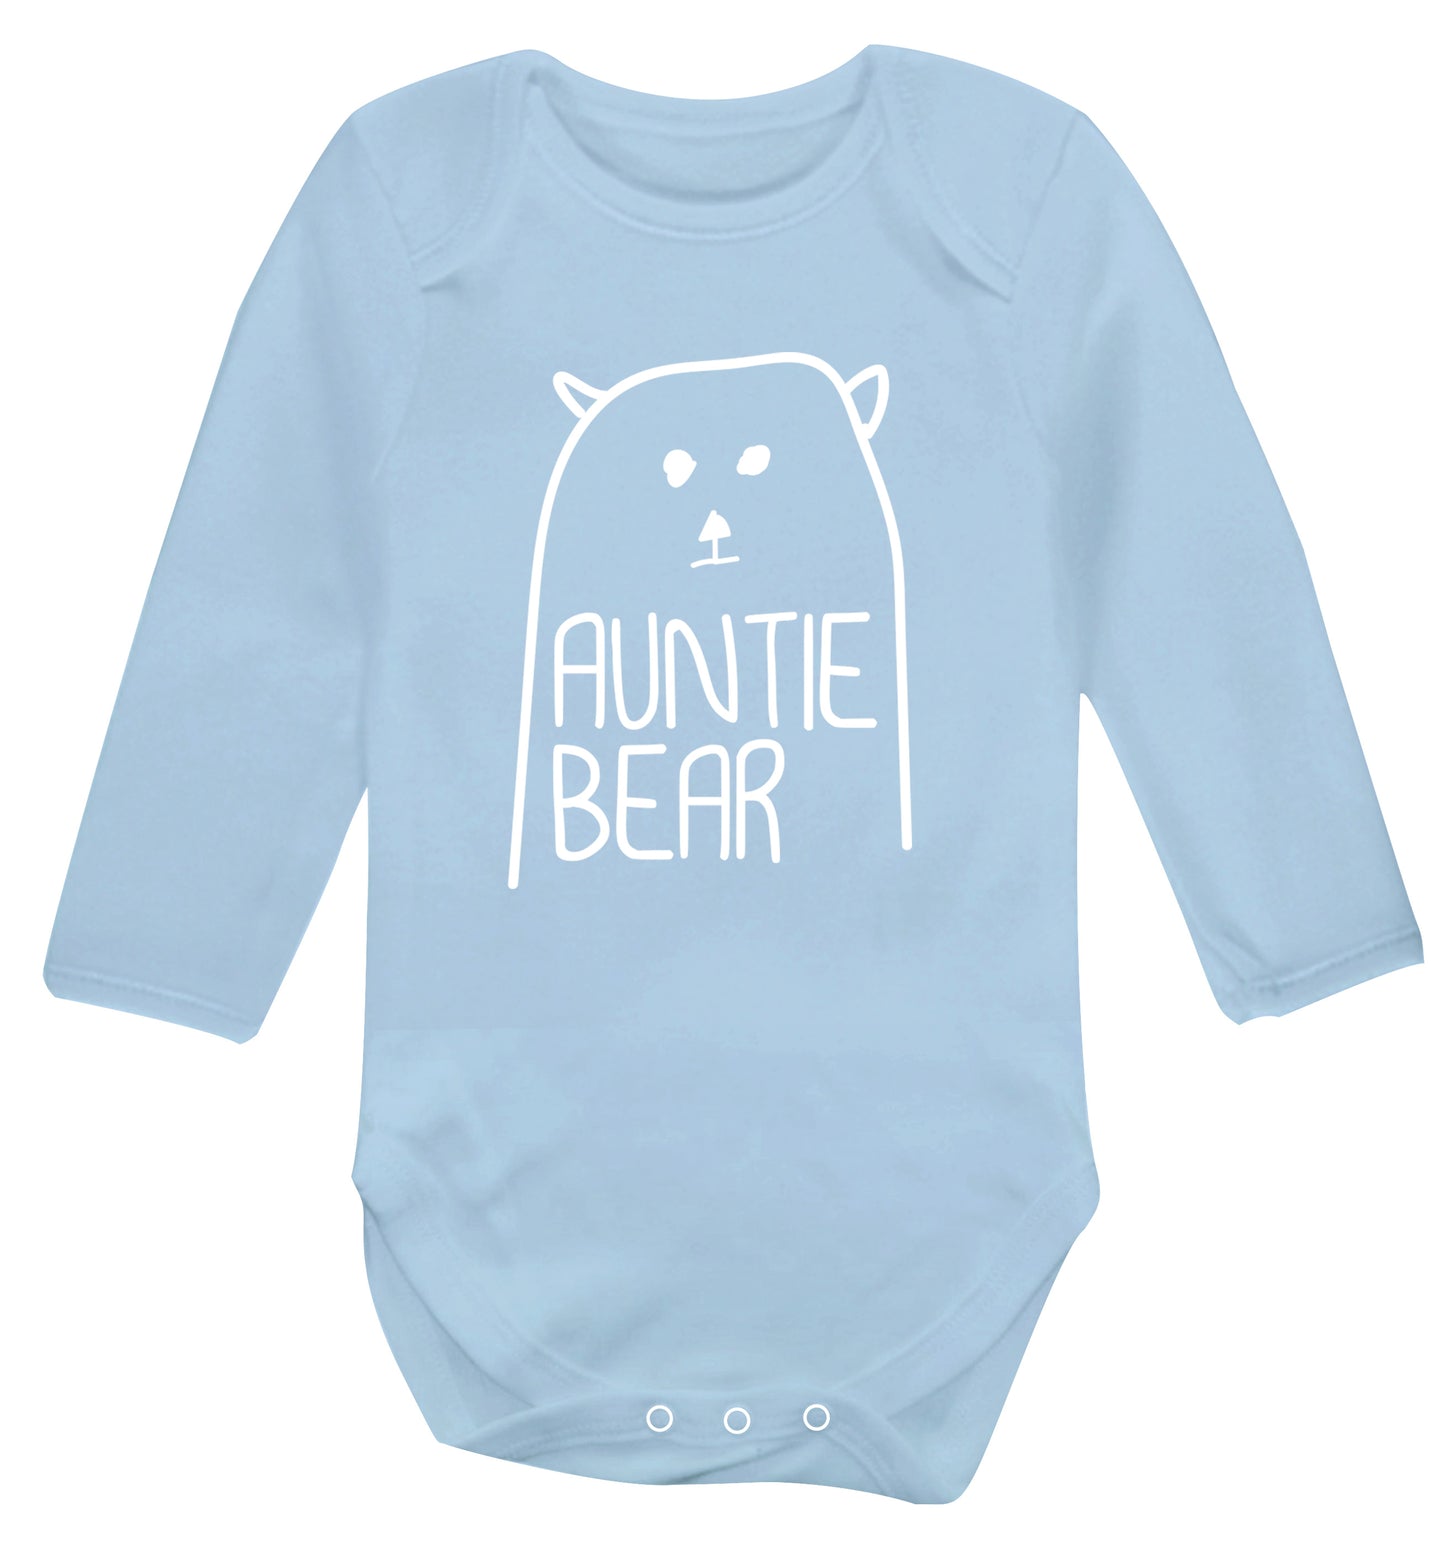 Auntie bear Baby Vest long sleeved pale blue 6-12 months